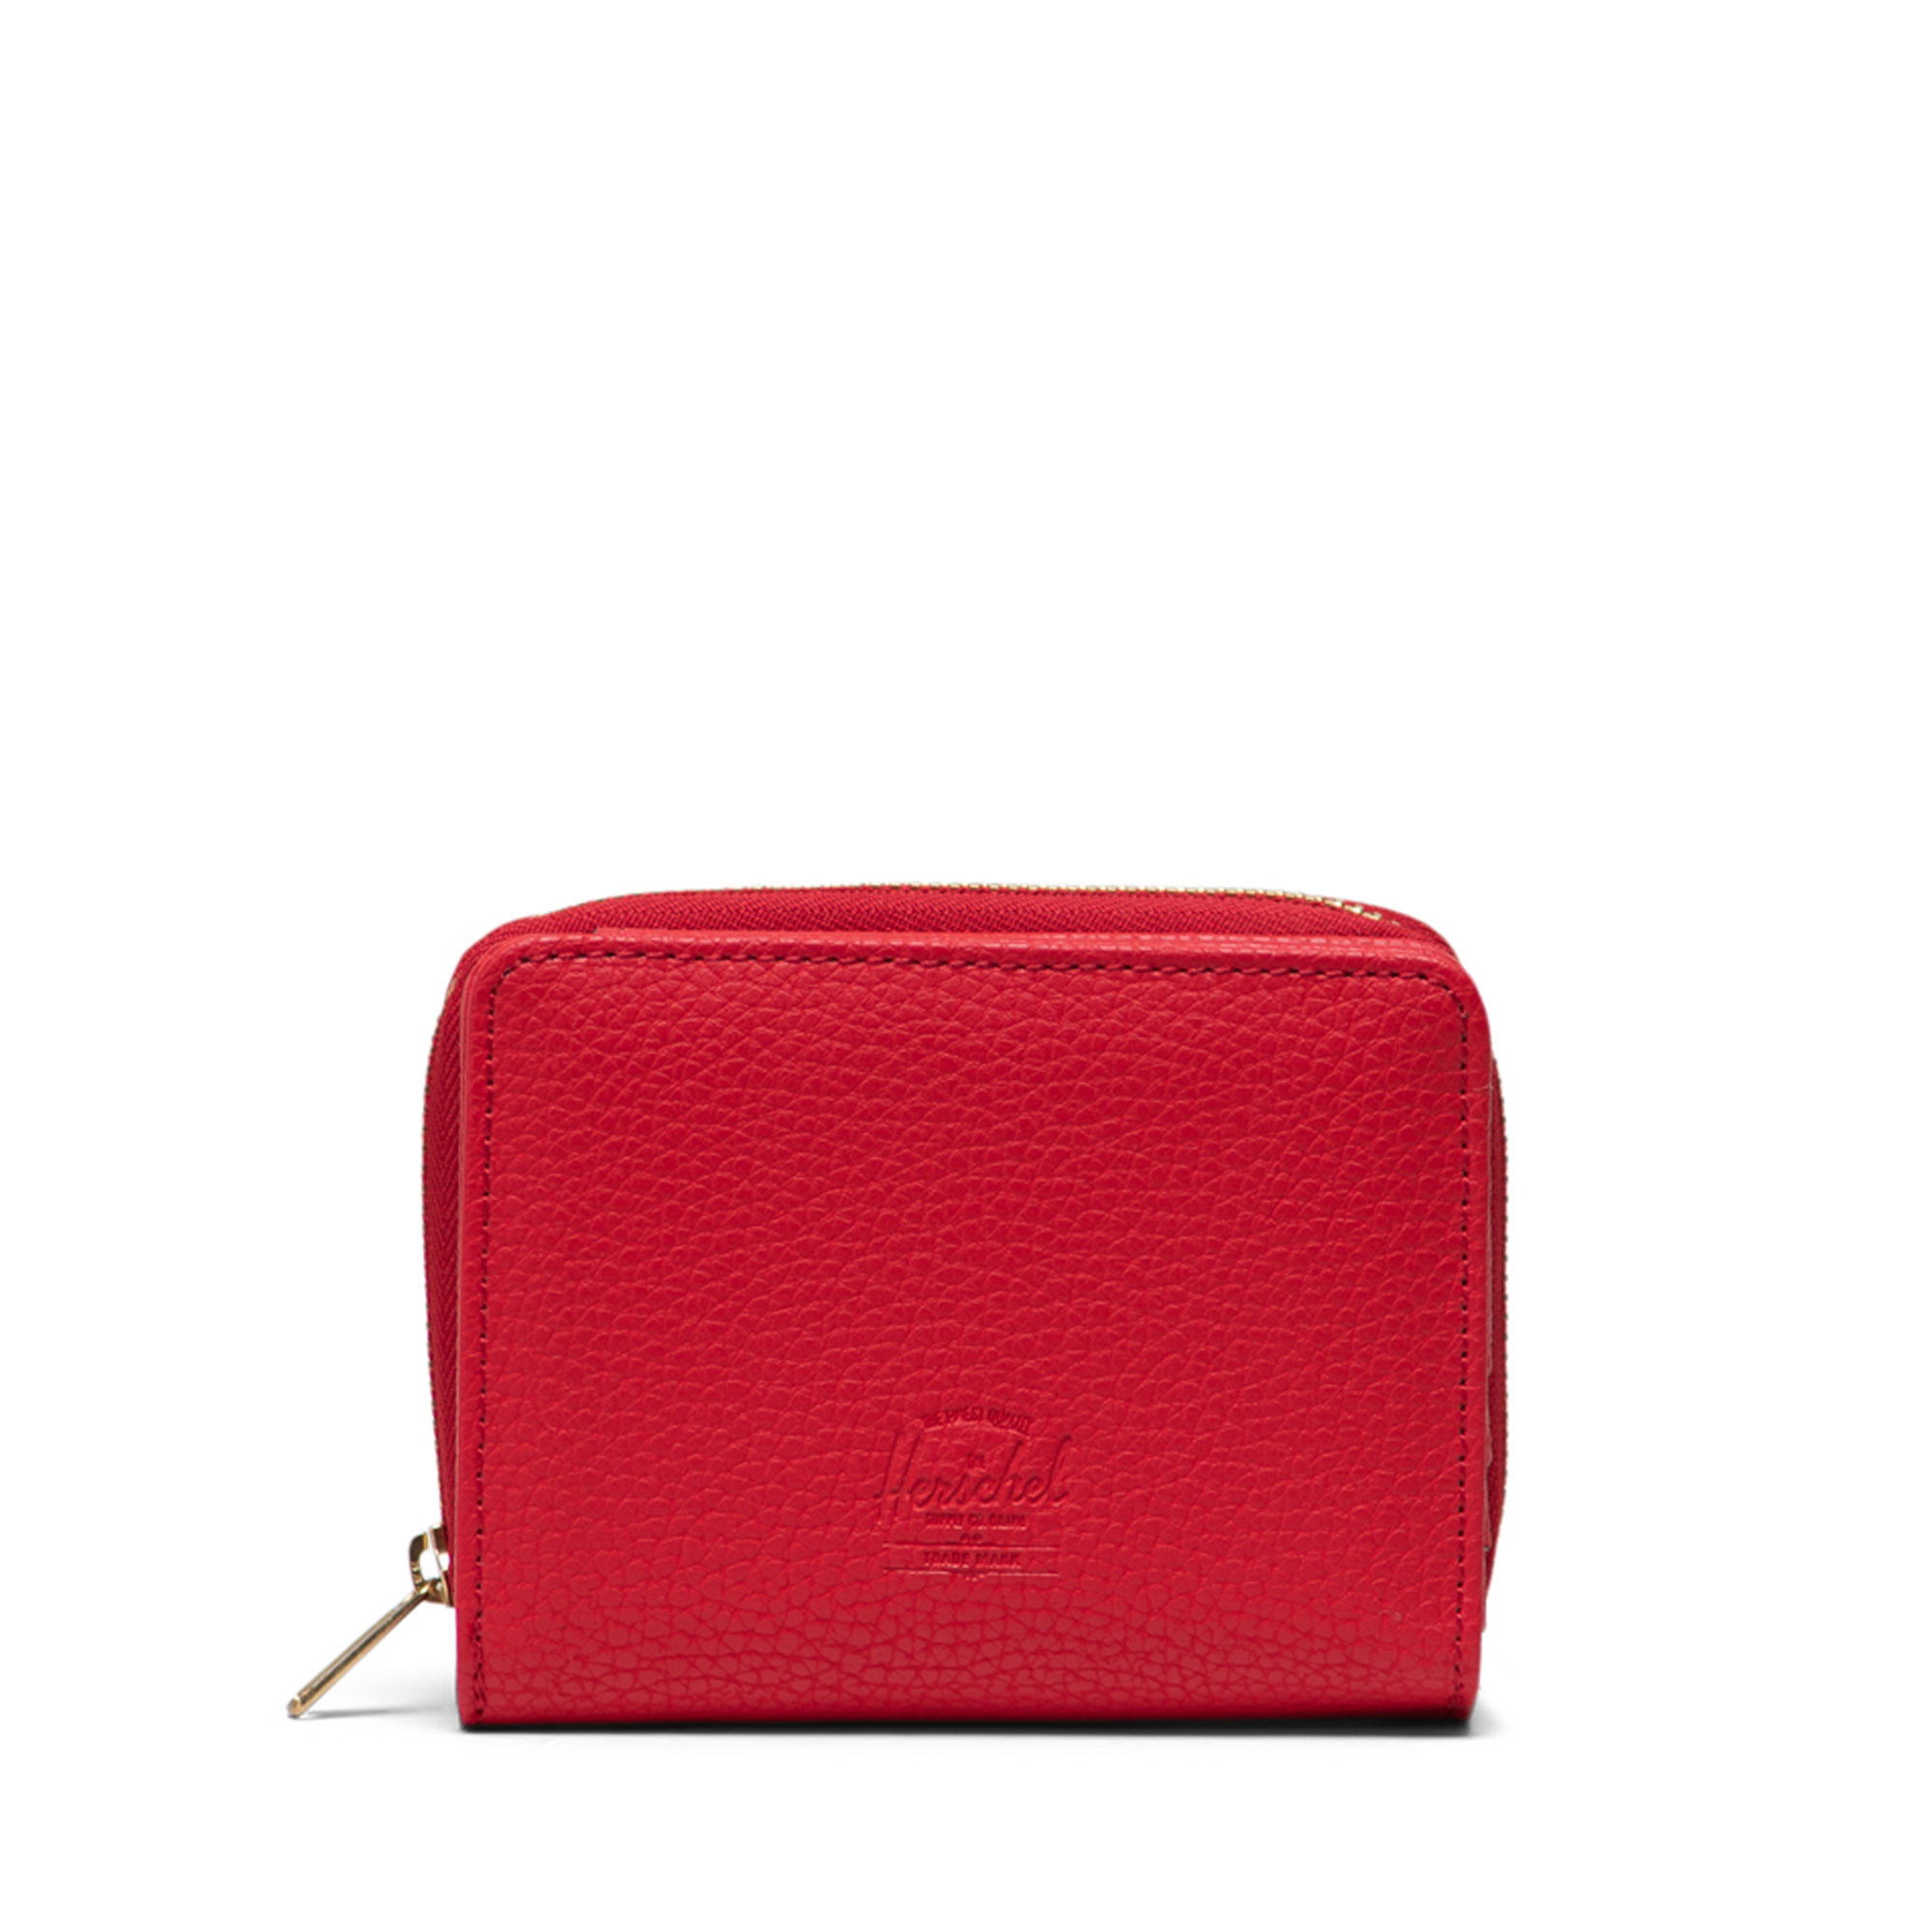 Accessorize London Women's Star Quilt Red Wallet - Accessorize India